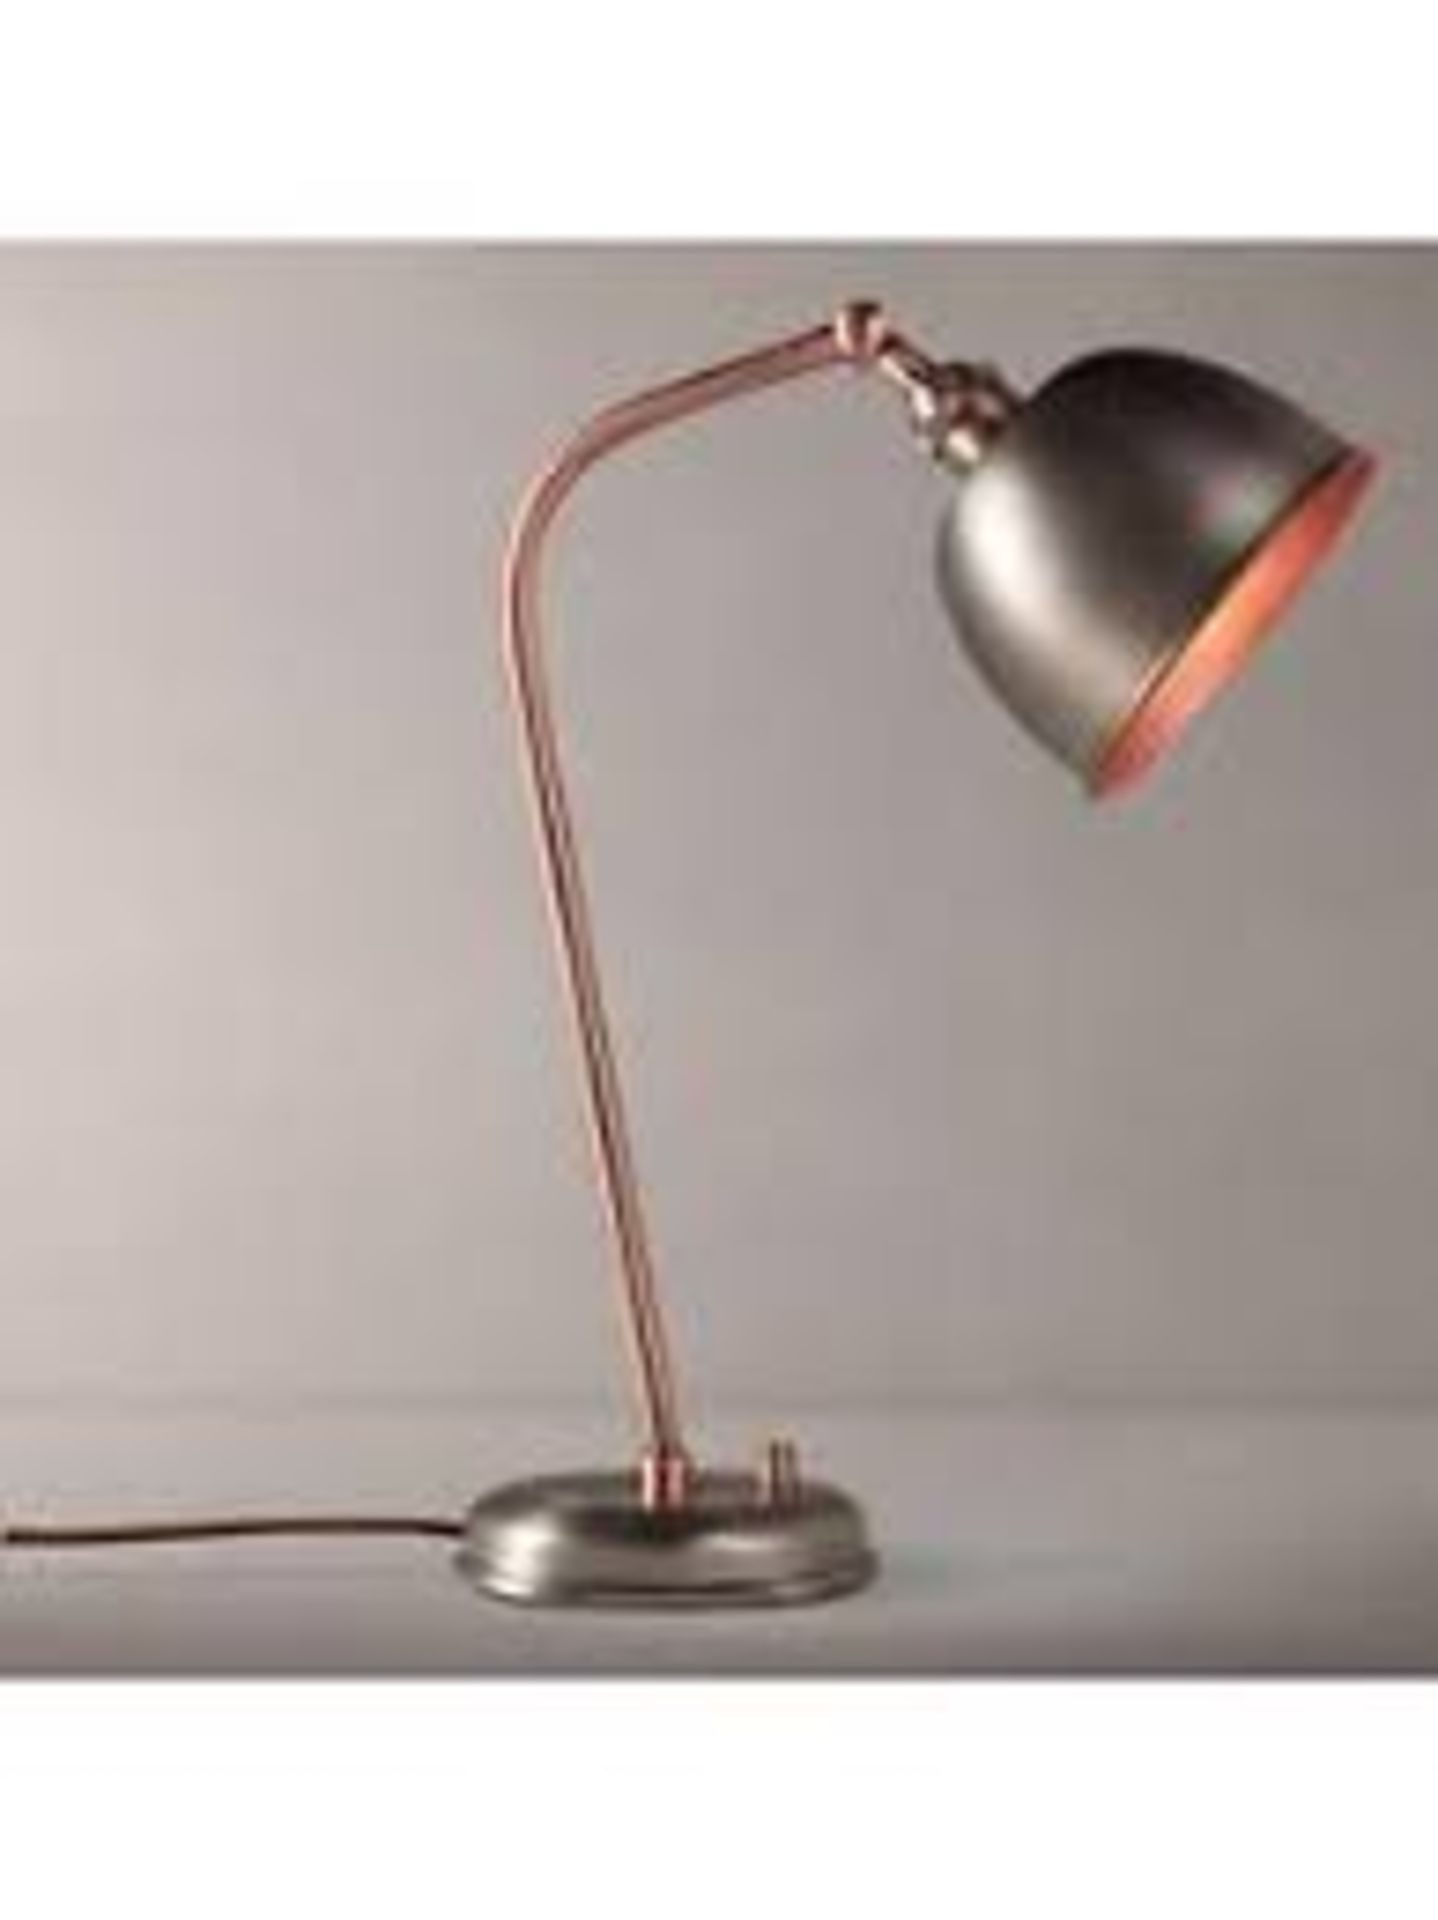 Boxed John Lewis and Partners Baldwin Pewter Finish Desk Lamp RRP £55 (2670477) (Public Viewing